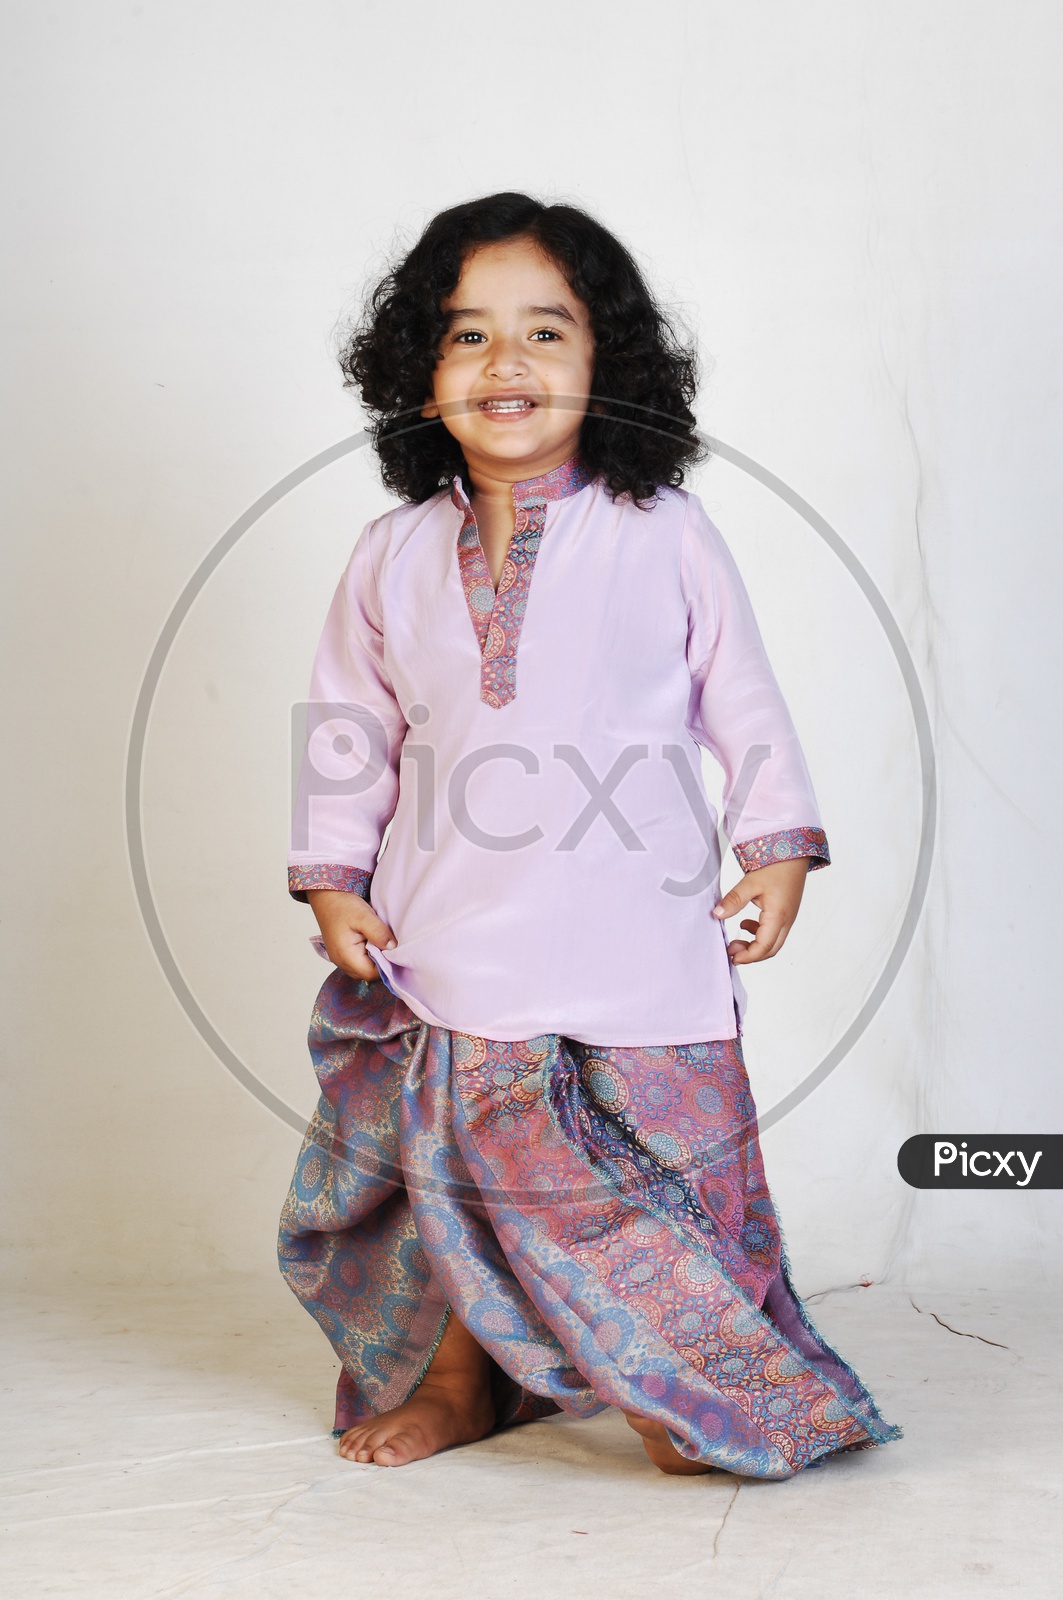 Indian Boy in Traditional Attire Over an Isolated White Background